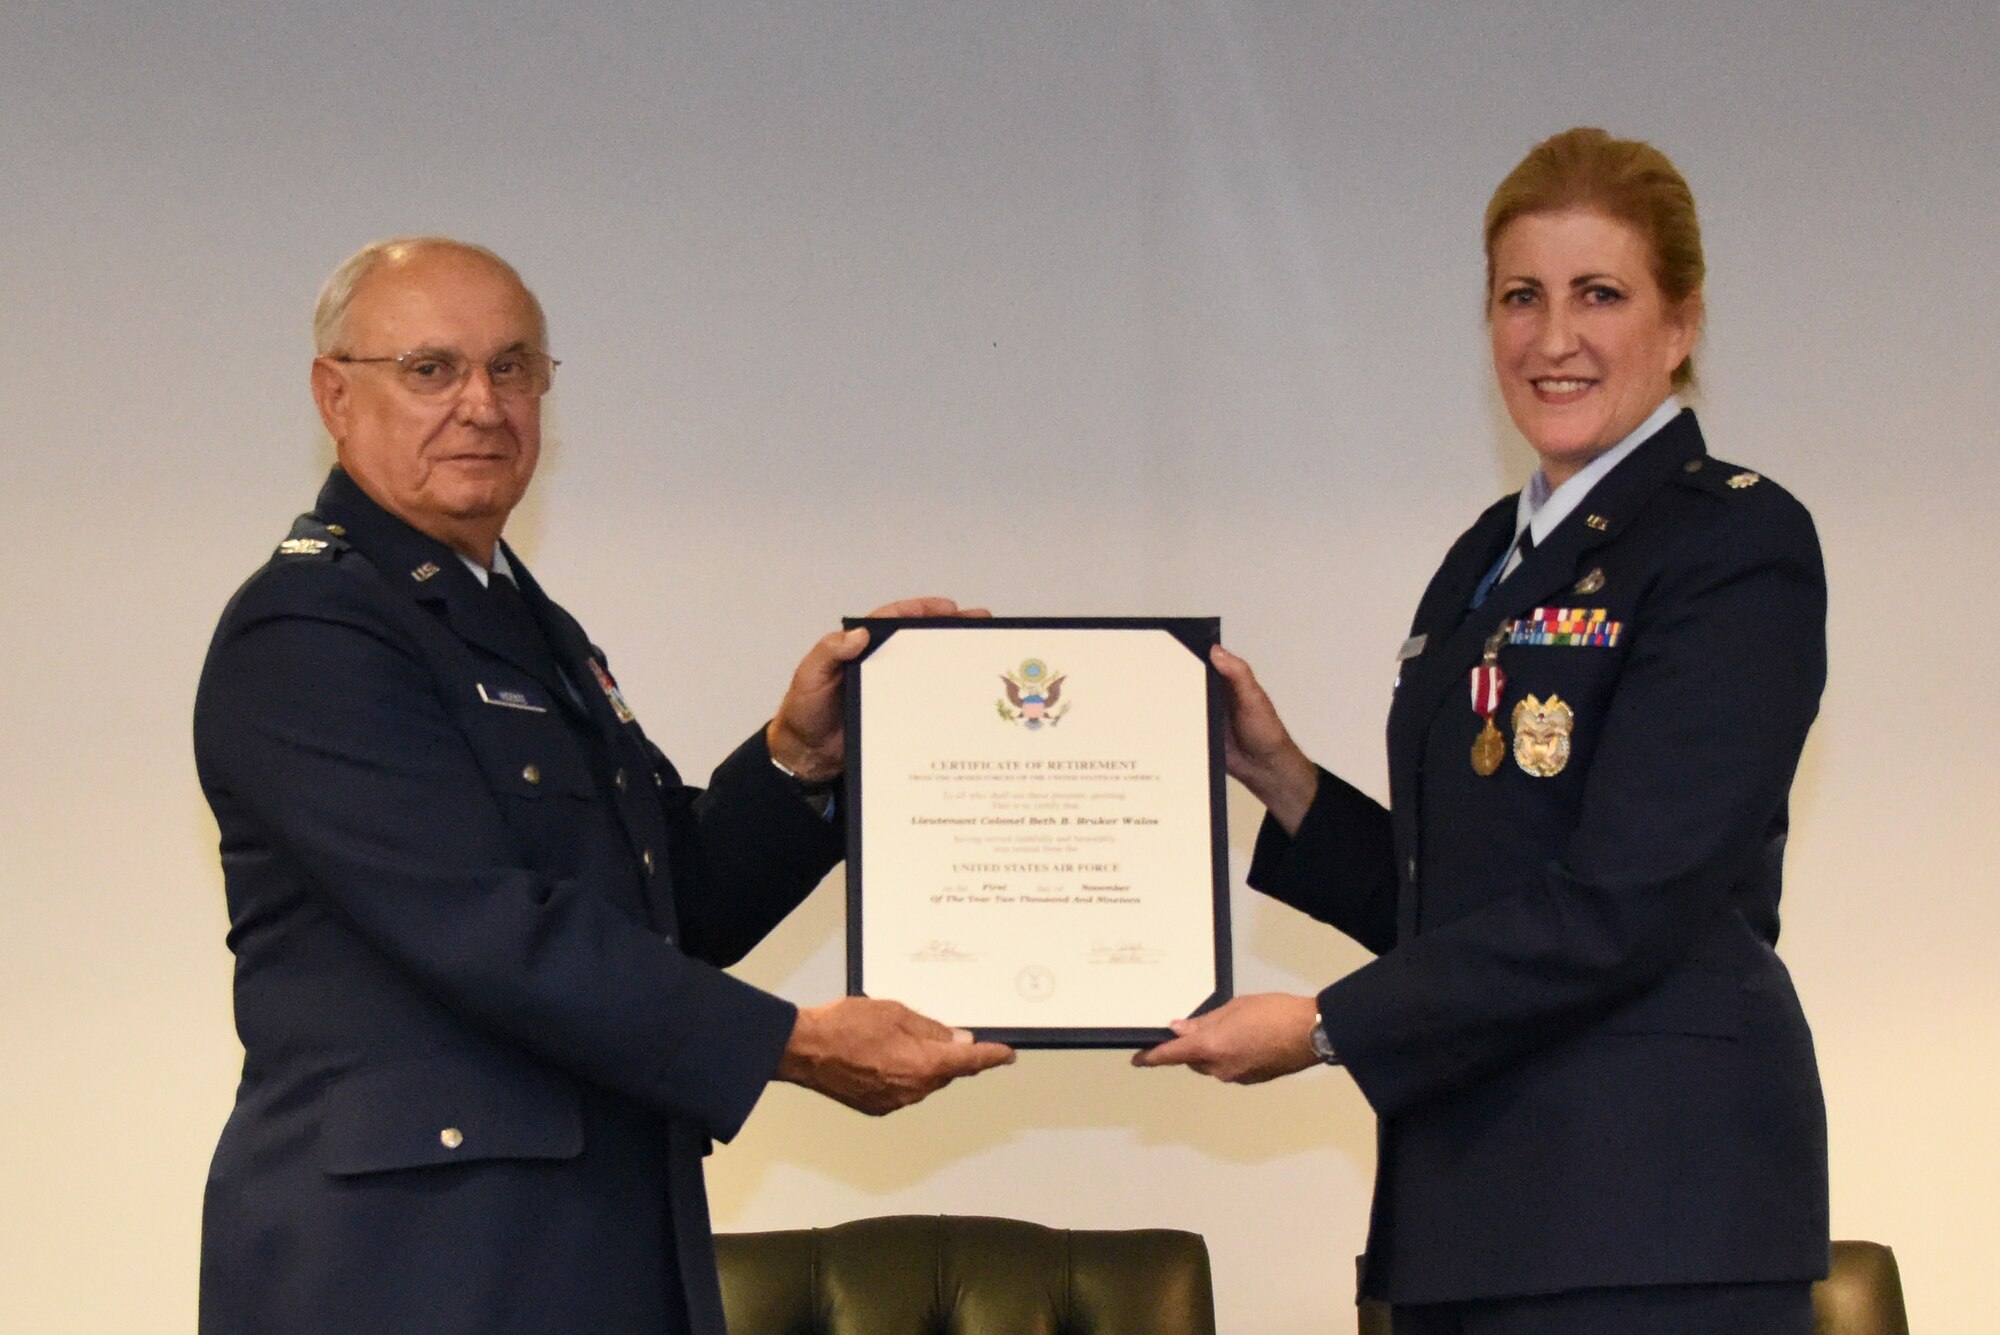 Lt. Col. Beth E. Bruker Walos, program administrator with the 911th Airlift Wing Inspector General inspections office, poses for a photo with Col. (Ret.) Frank Vicente during her retirement ceremony at the Pittsburgh International Airport Air Reserve Station, Pennsylvania, Nov. 2, 2019.